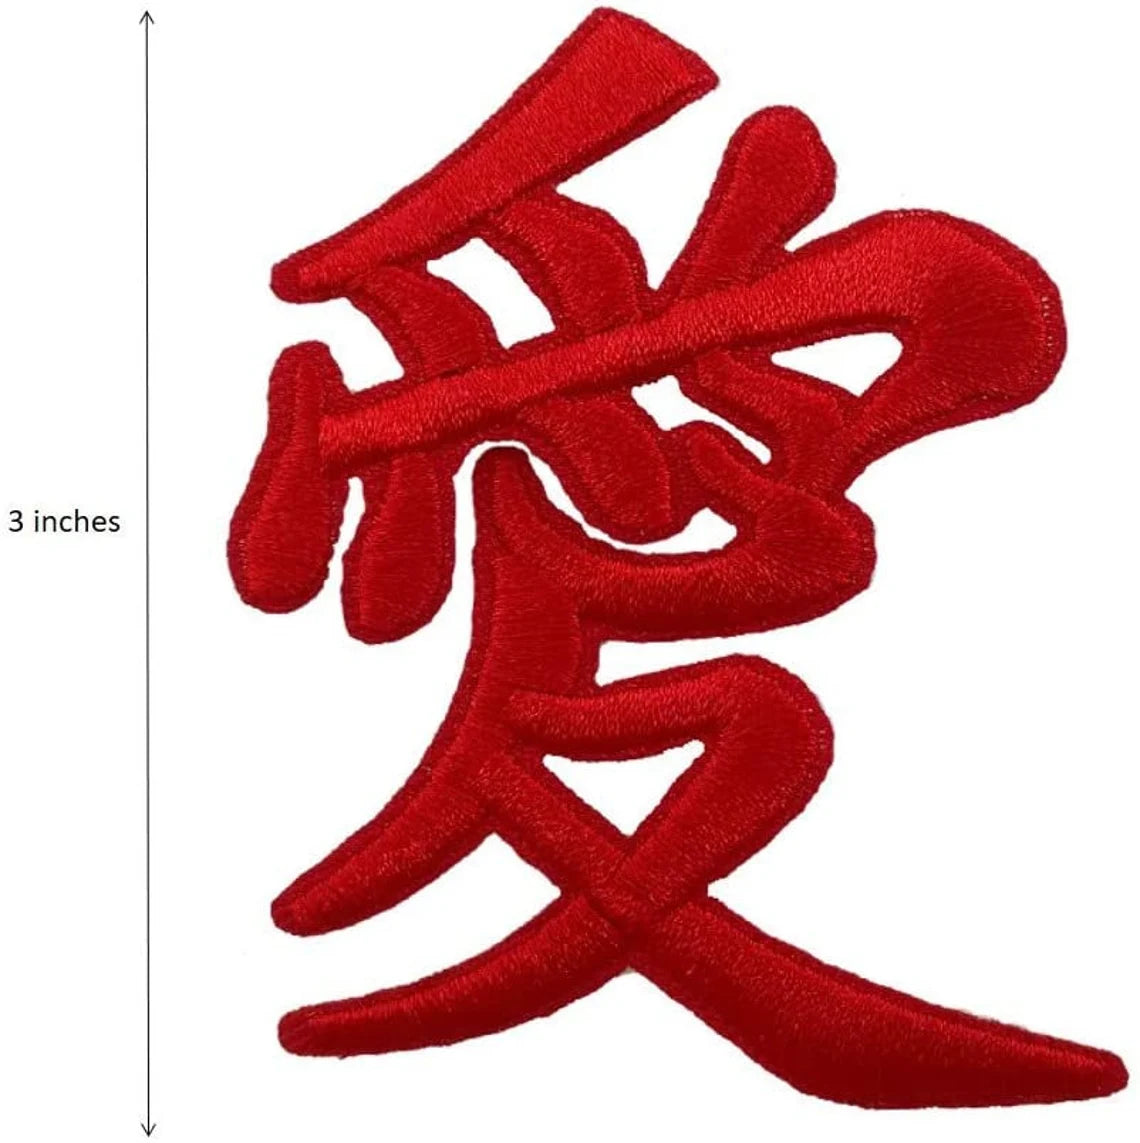 chinese symbol for passion